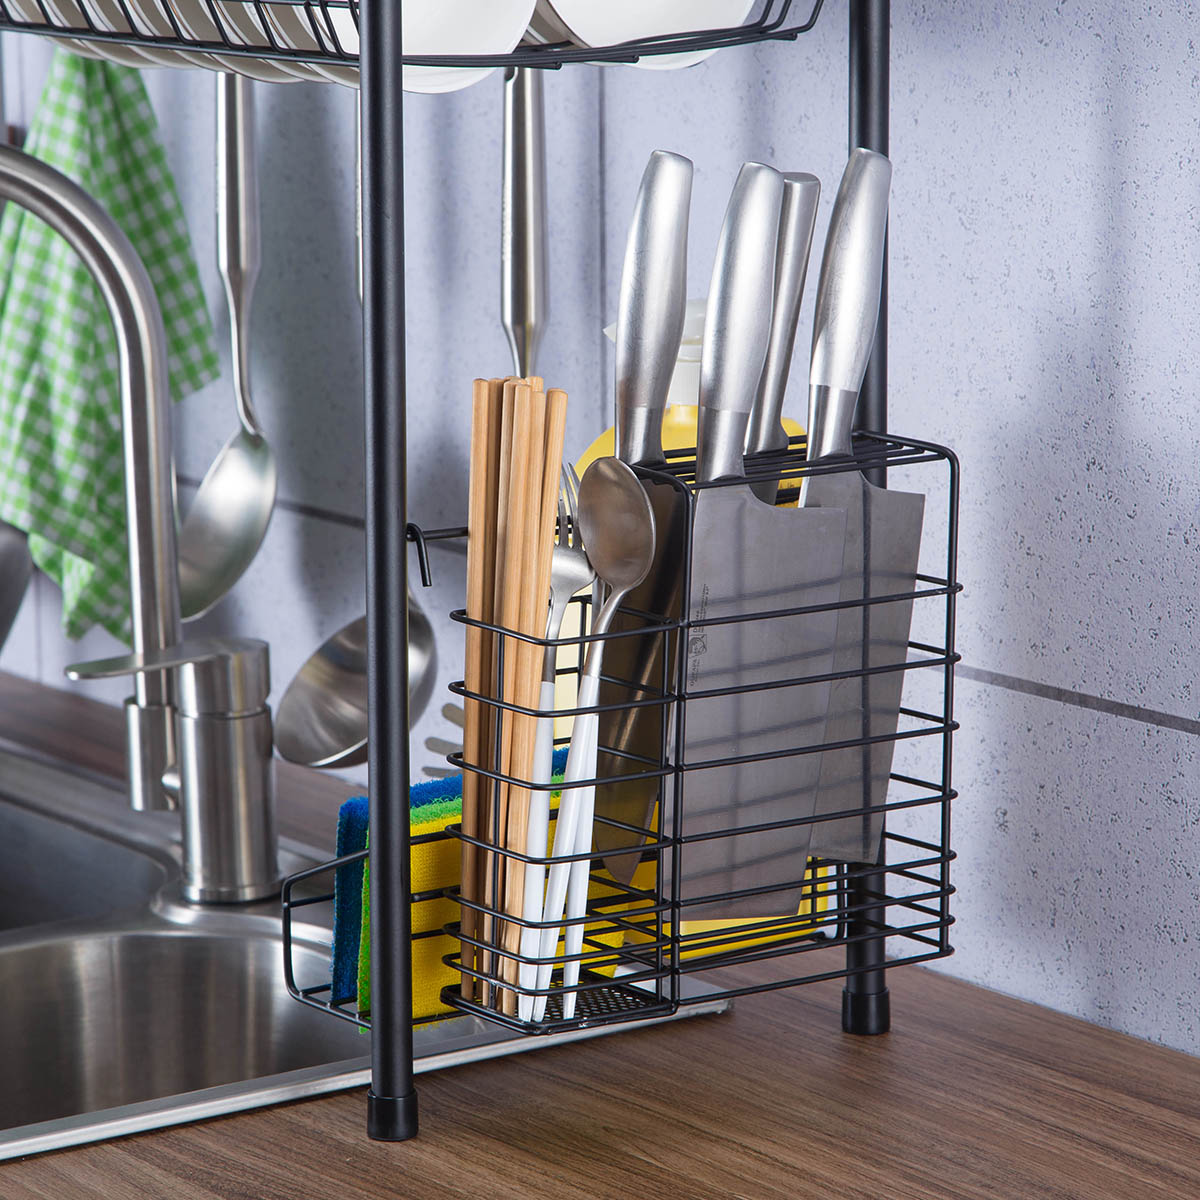 Double-Layer-Shelf-Dish-Stainless-Holder-Steel-Sink-Drain-Rack-Kitchen-Cutlery-Drying-Drainer-Kitche-1566519-4